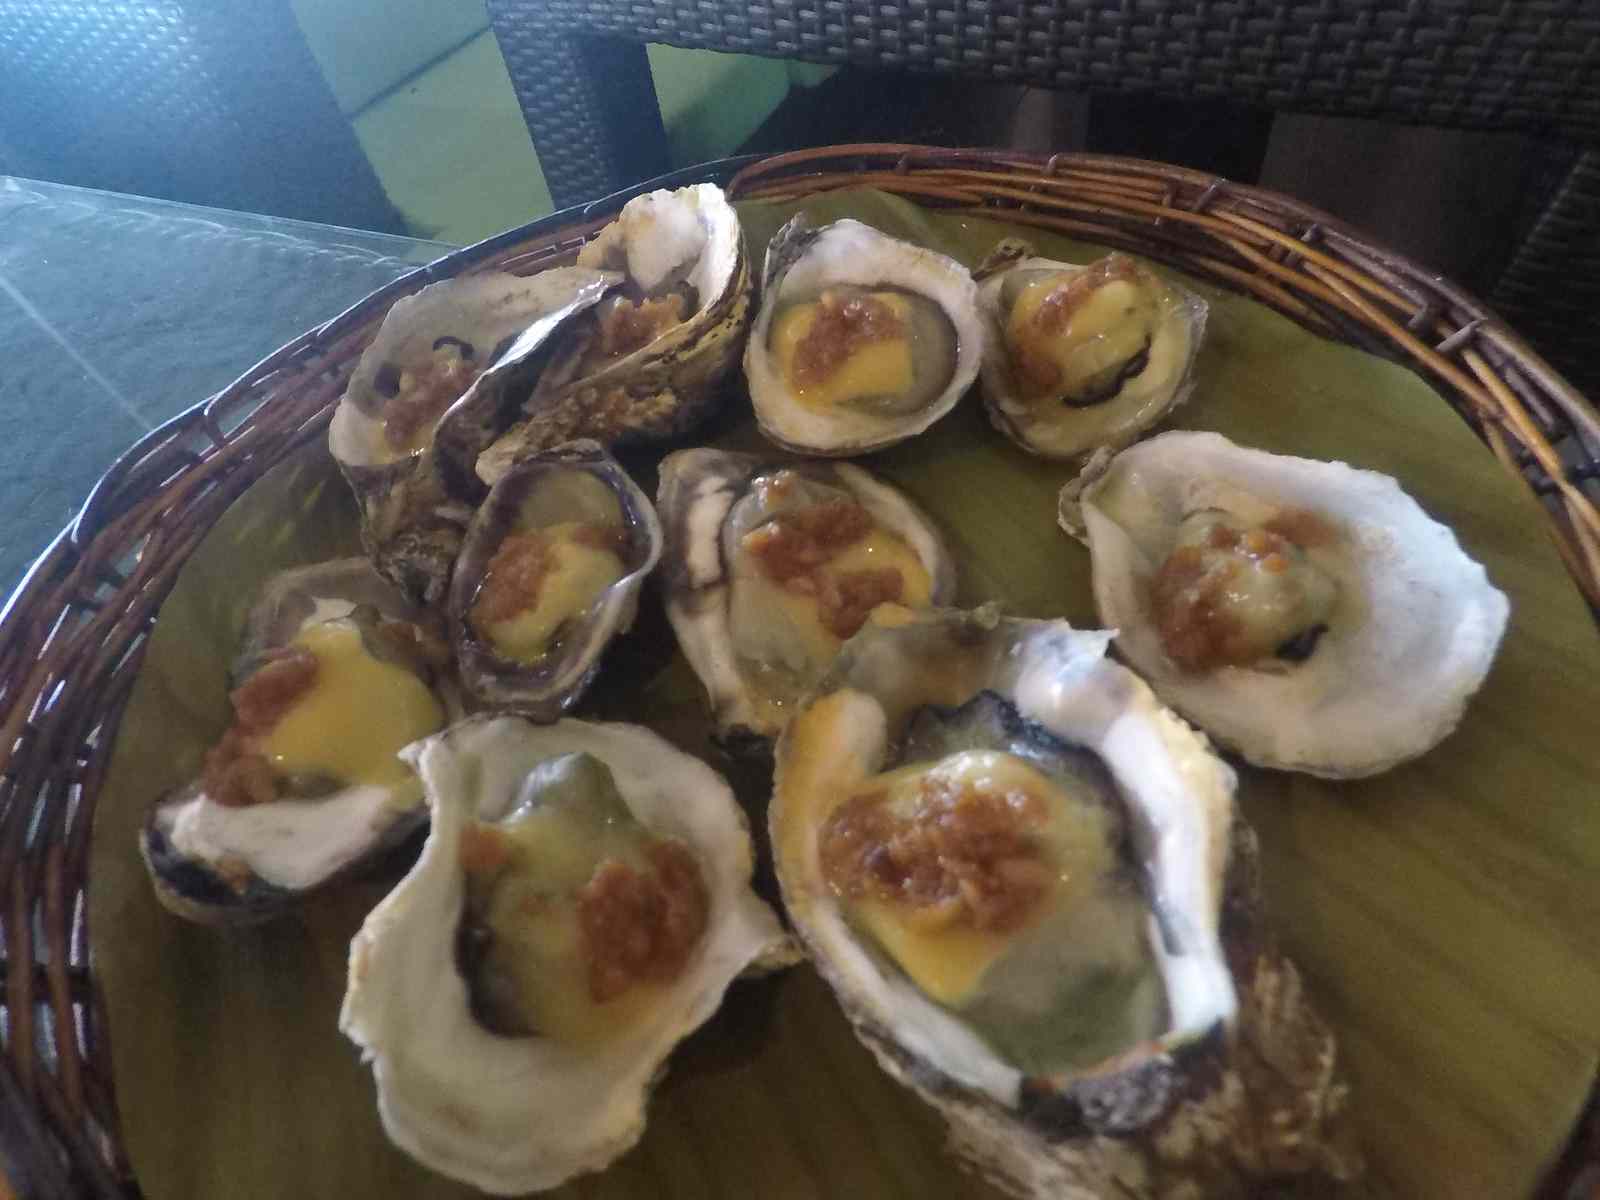 Baked oysters at Lantaw Seafood Restaurant